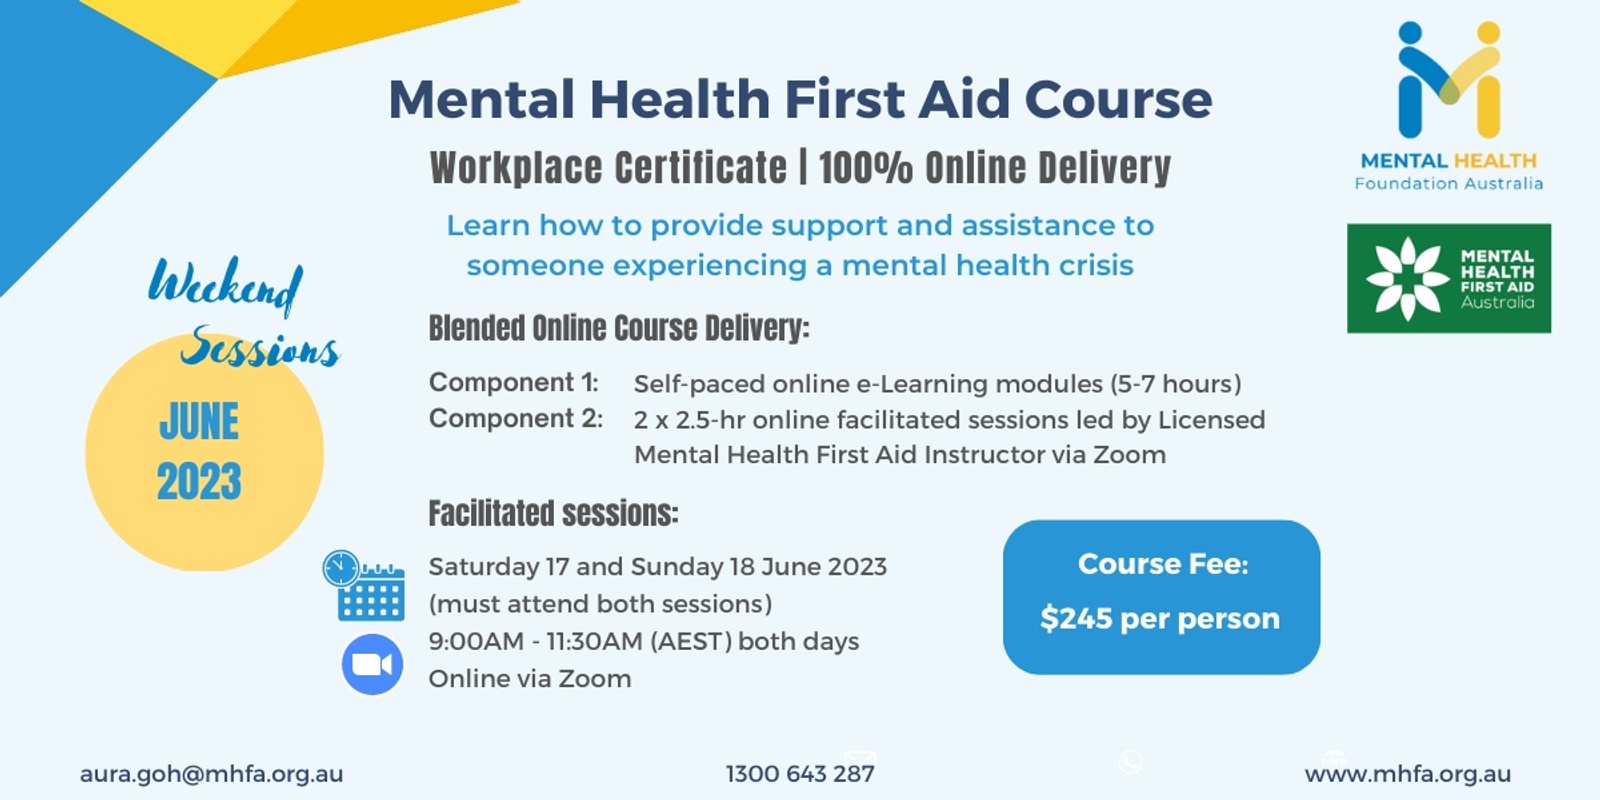 Blended Online Mental Health First Aid Course - June 2023 (Weekend Sessions)